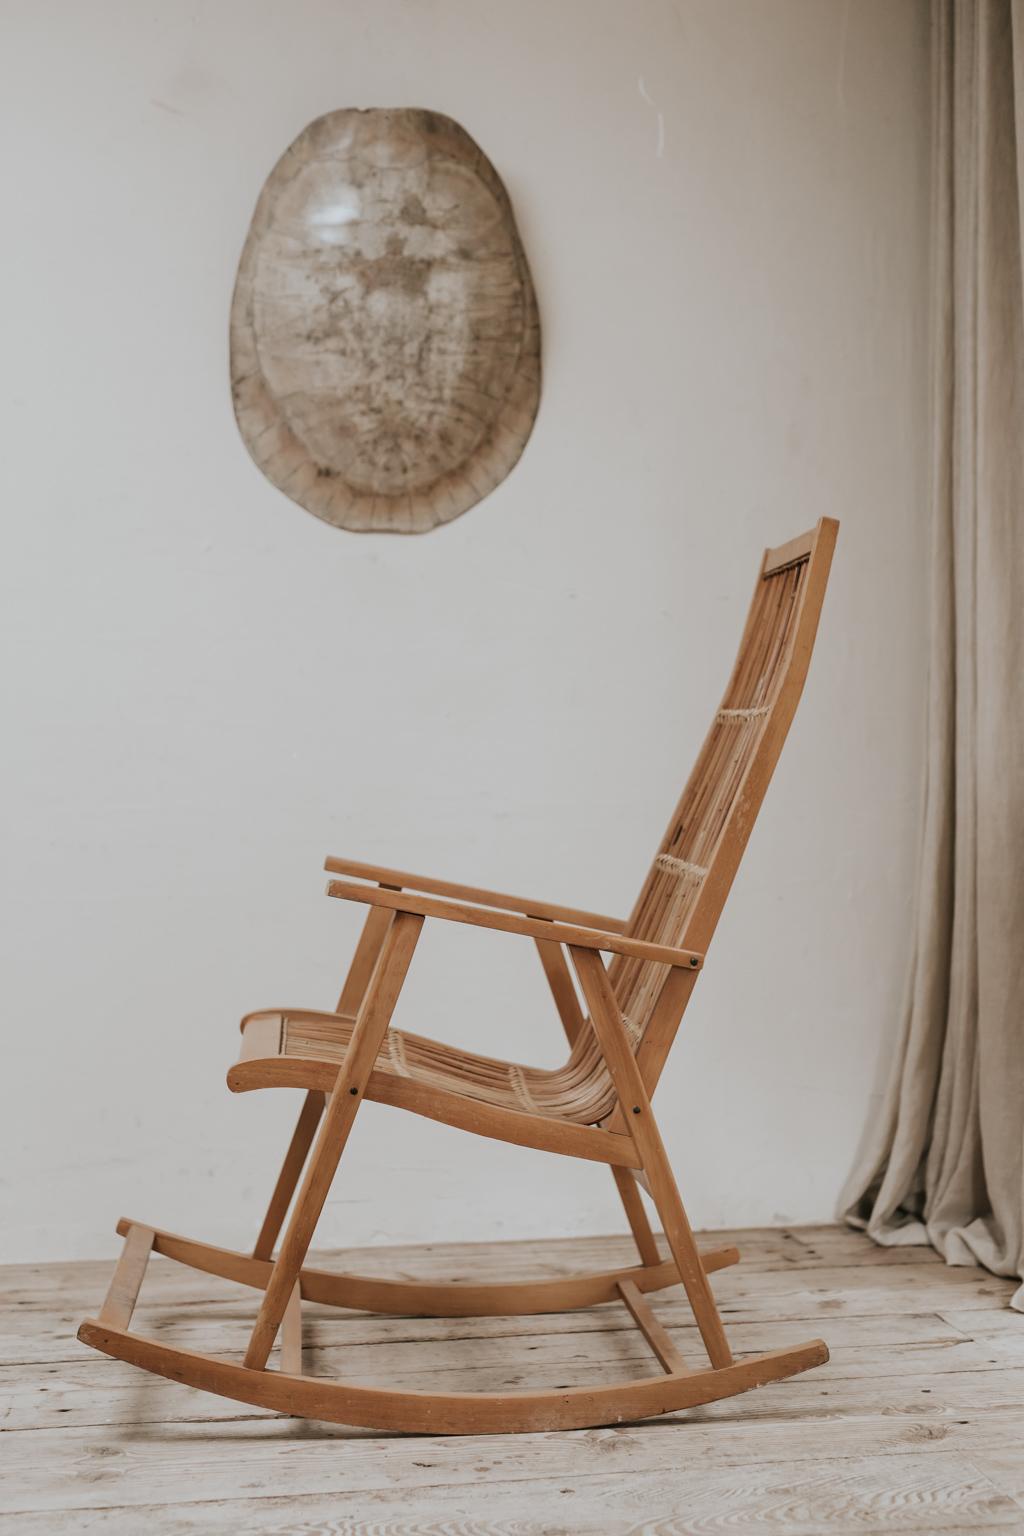 German 20th Century Vintage Rocking Chair For Sale